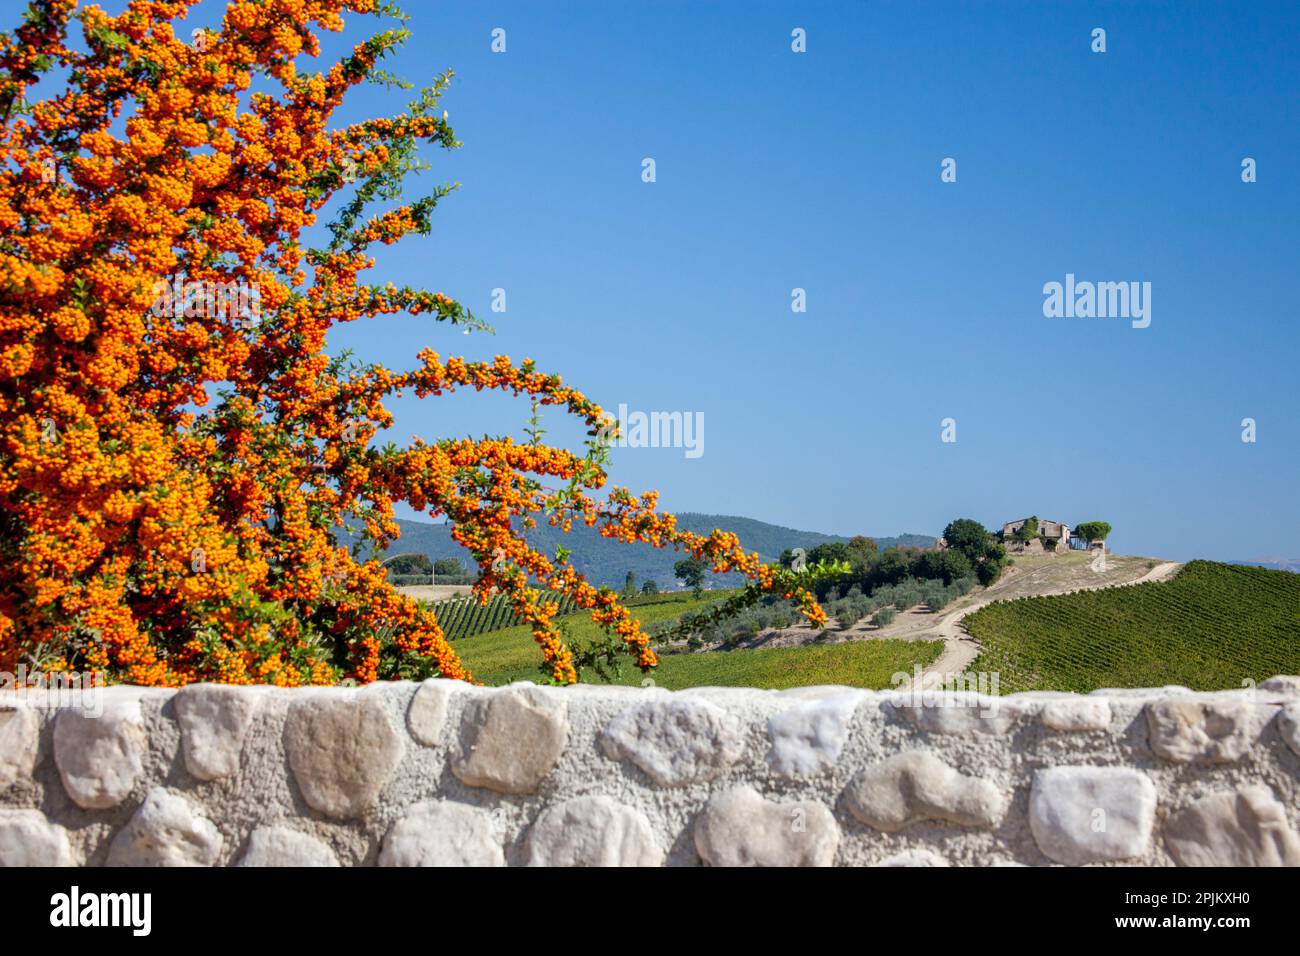 Italy, Umbria. Home surrounded by vineyards and bush with orange berries. Stock Photo